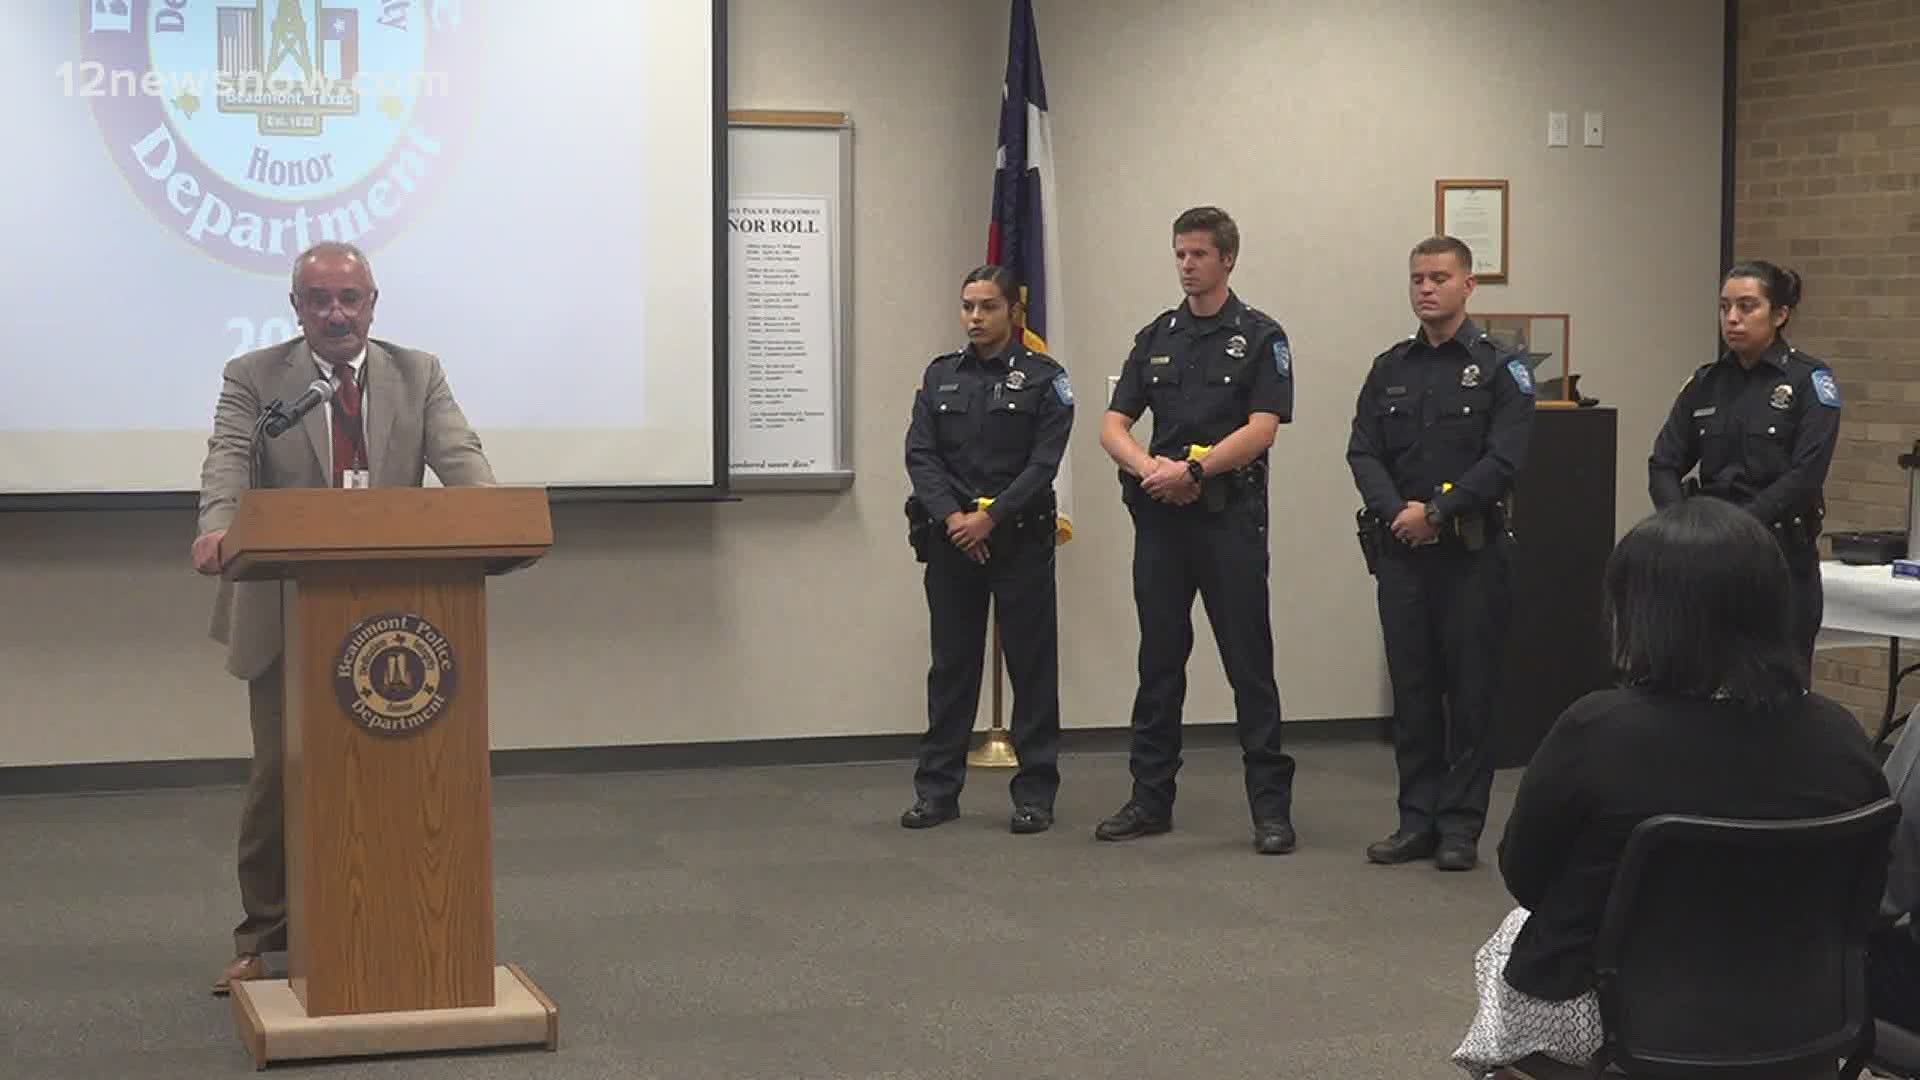 Four new officers joined the Beaumont Police Department on Wednesday, a welcome sign of hope in the wake of officer Yarbrough-Powell's death